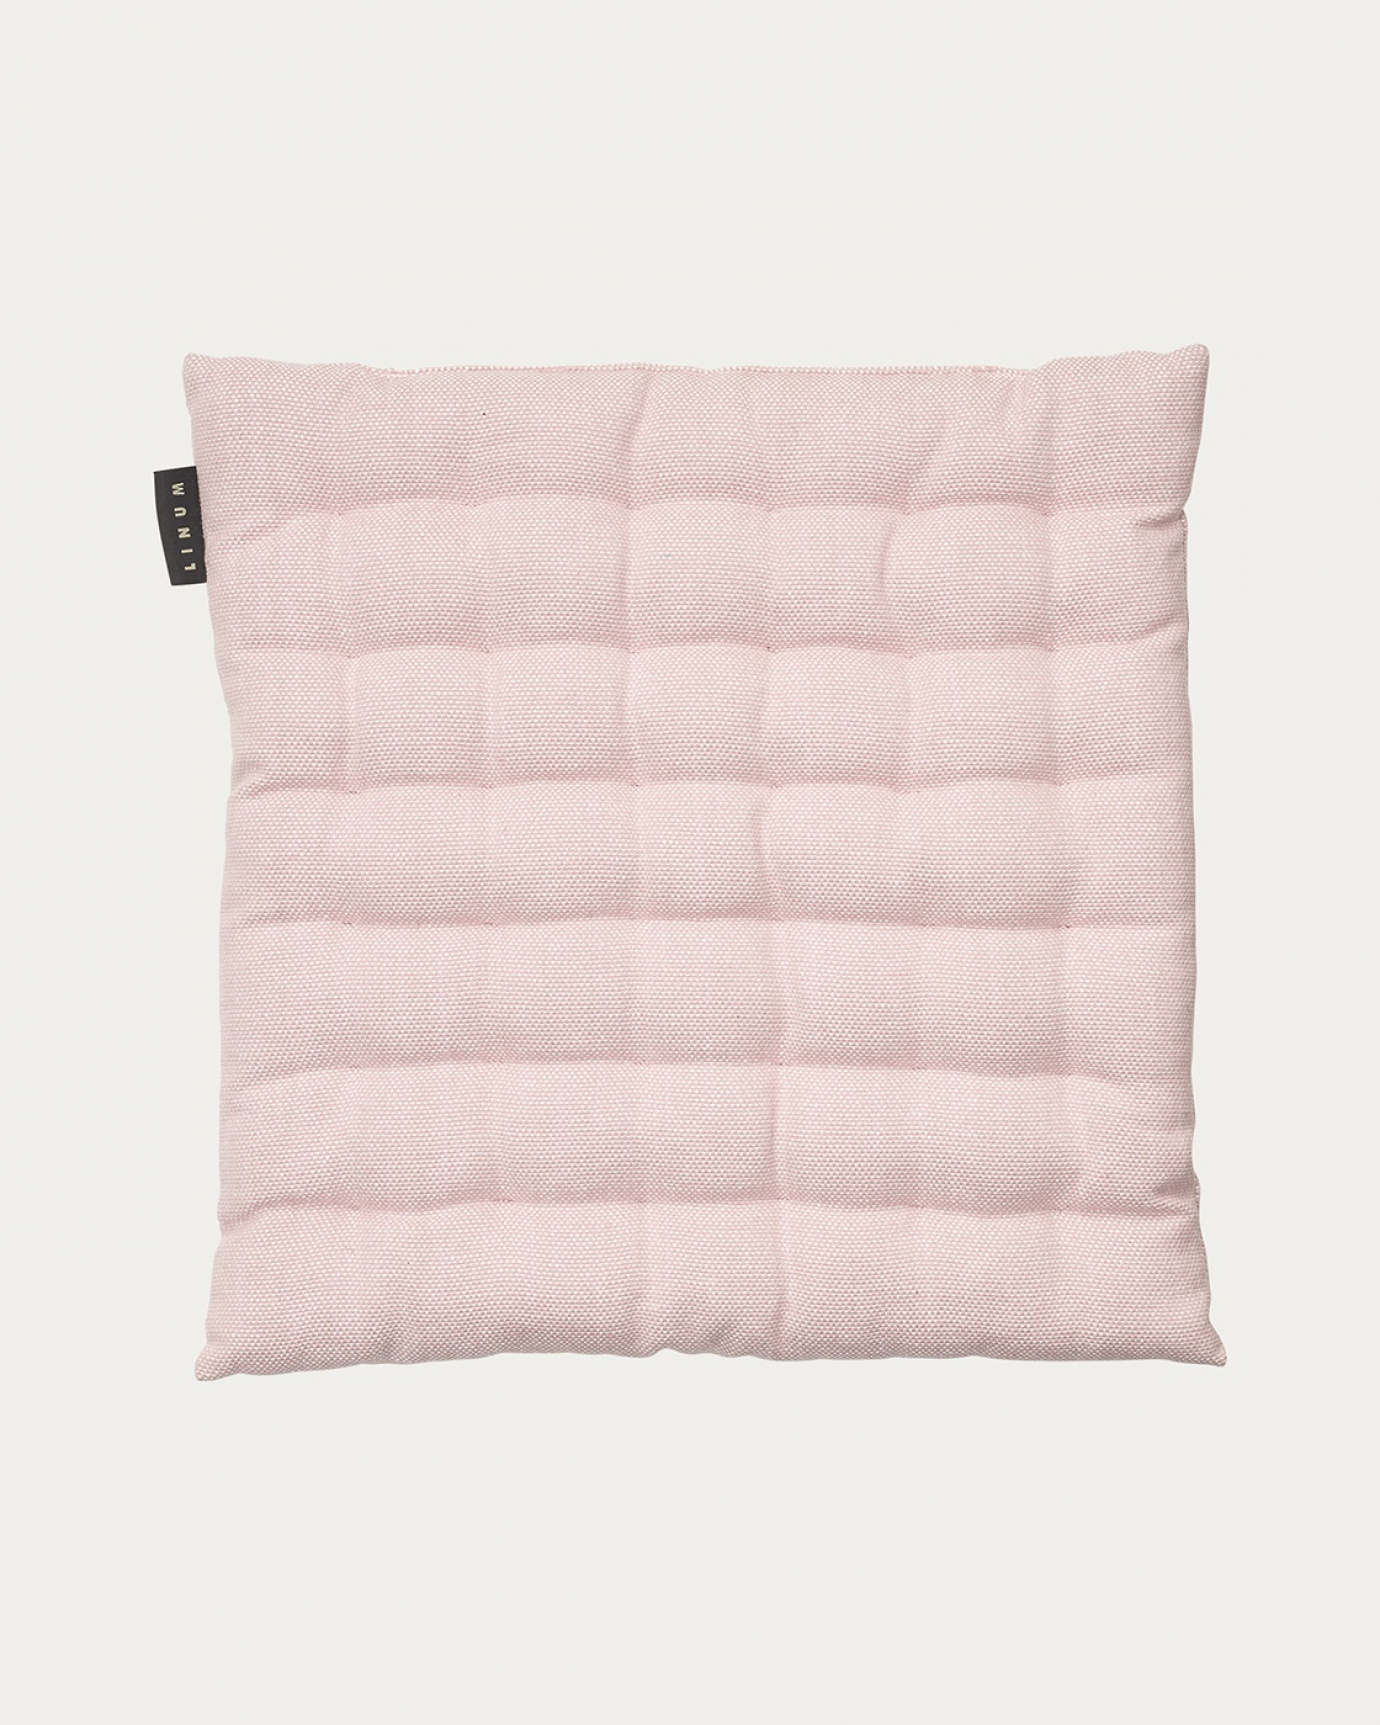 Product image dusty pink PEPPER seat cushion made of soft cotton with recycled polyester filling from LINUM DESIGN. Size 40x40 cm.